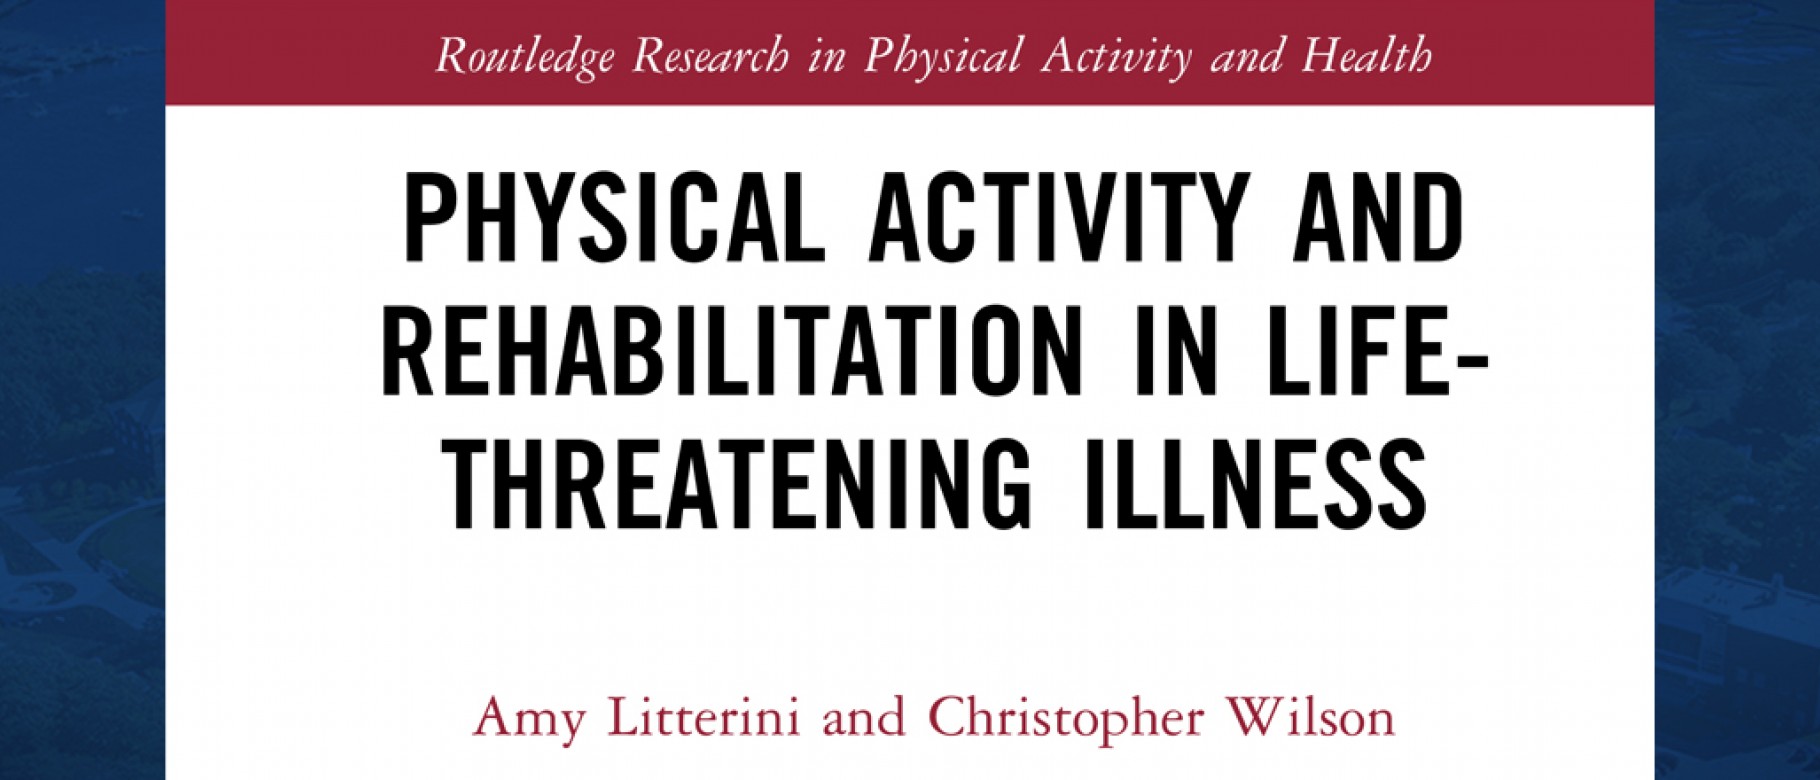 The book, "Physical Activity and Rehabilitation in Life-threatening Illness"